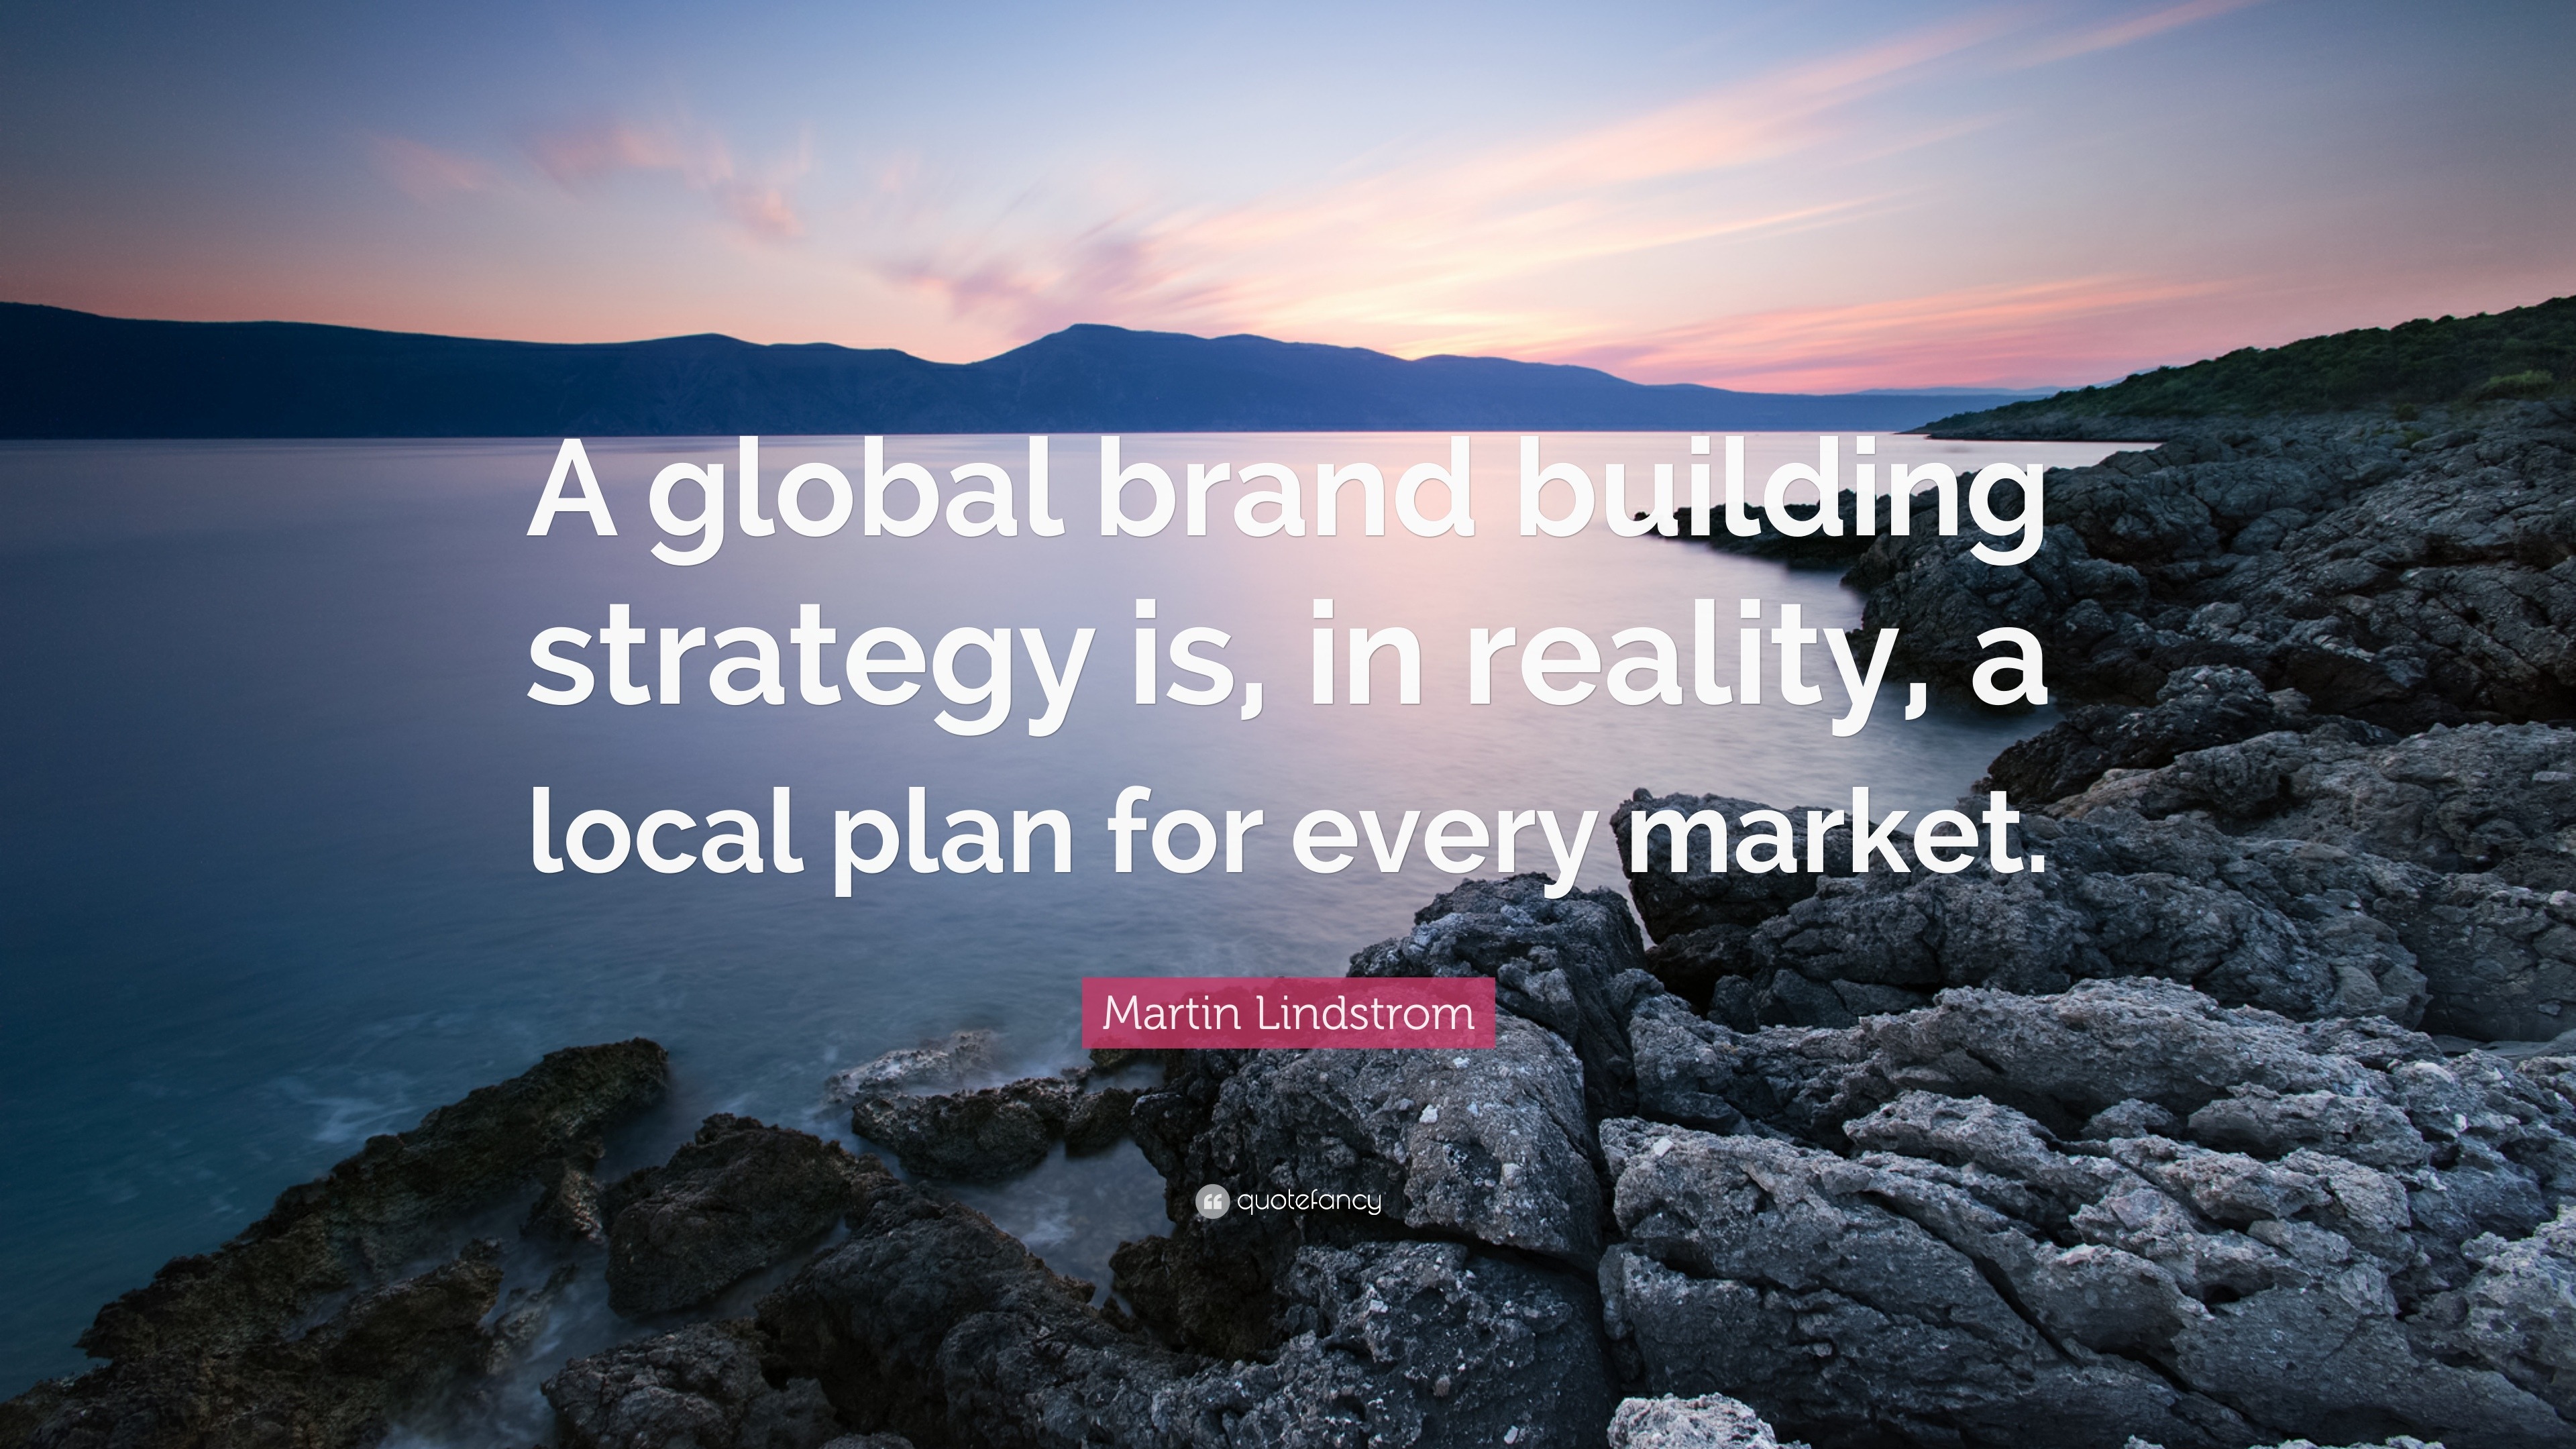 https://quotefancy.com/media/wallpaper/3840x2160/1591000-Martin-Lindstrom-Quote-A-global-brand-building-strategy-is-in.jpg